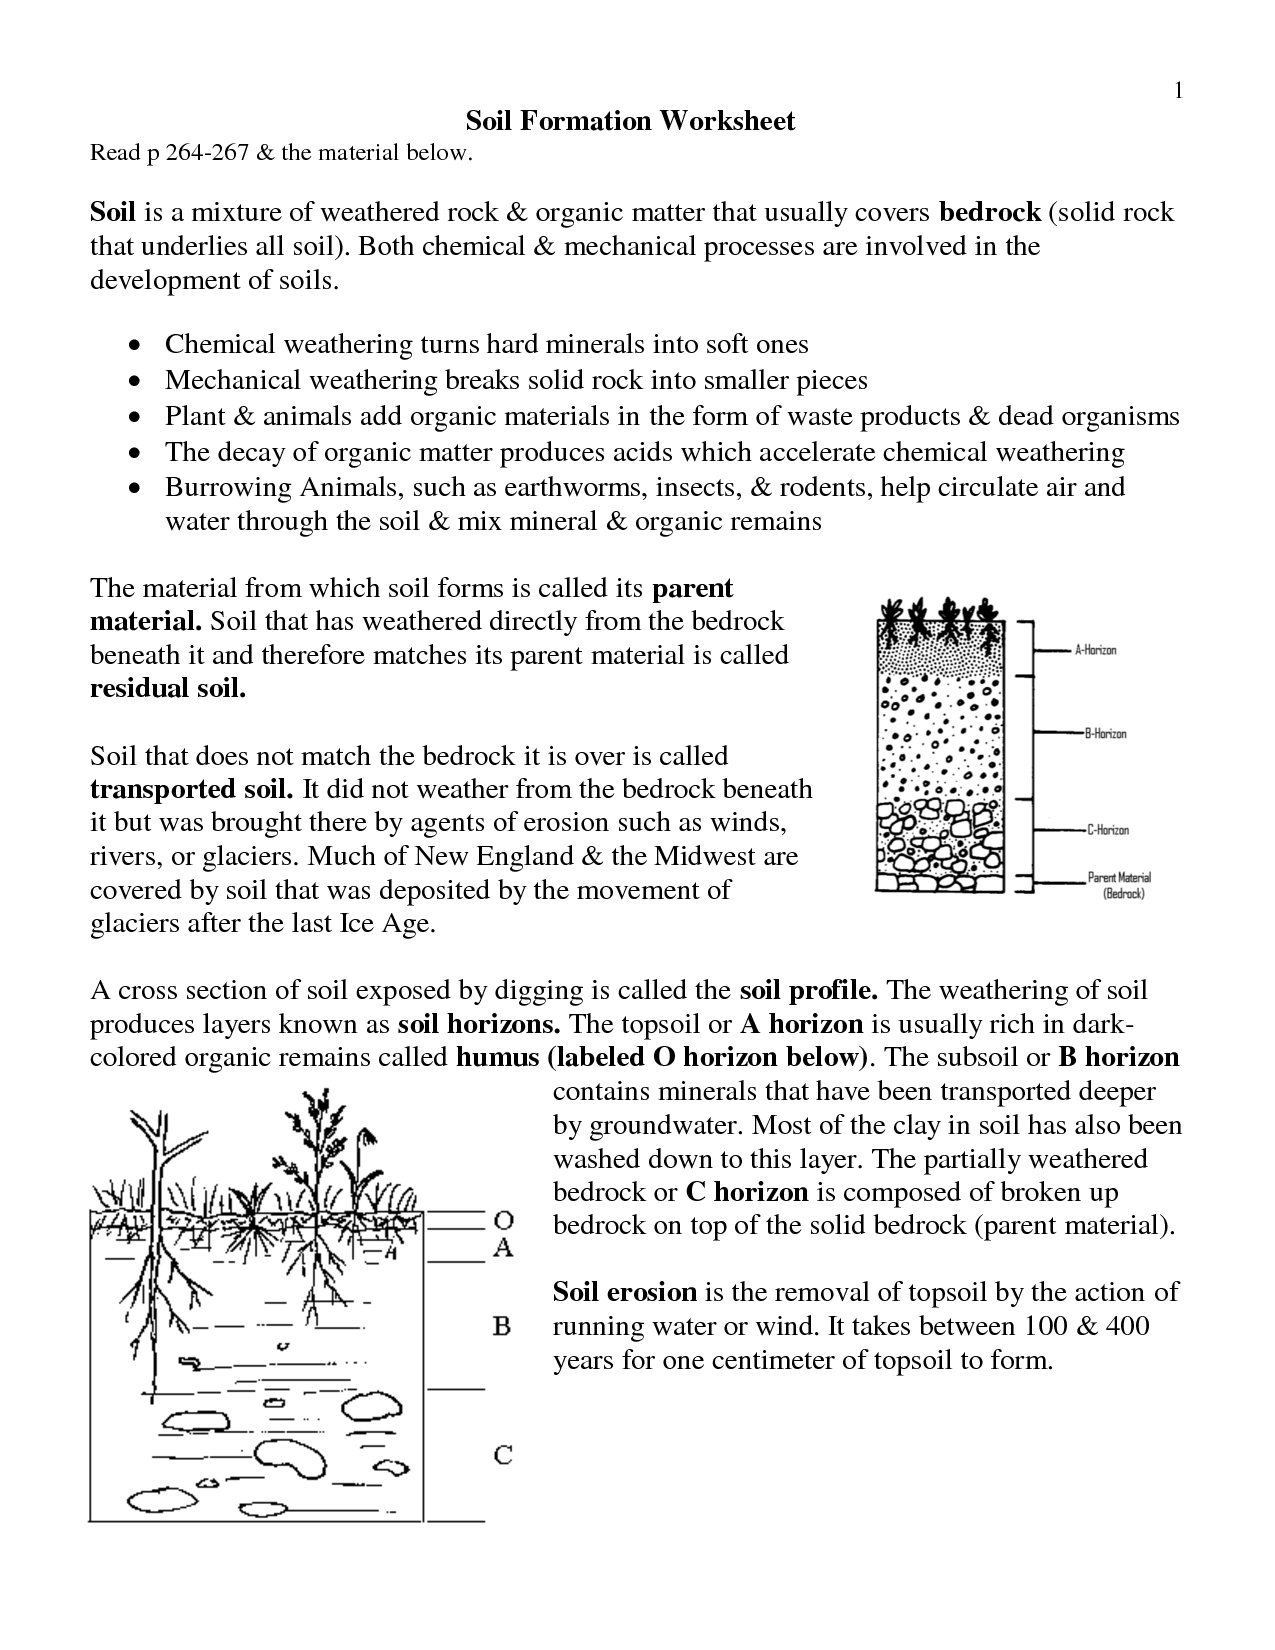 Soil Formation Worksheet Answers Image